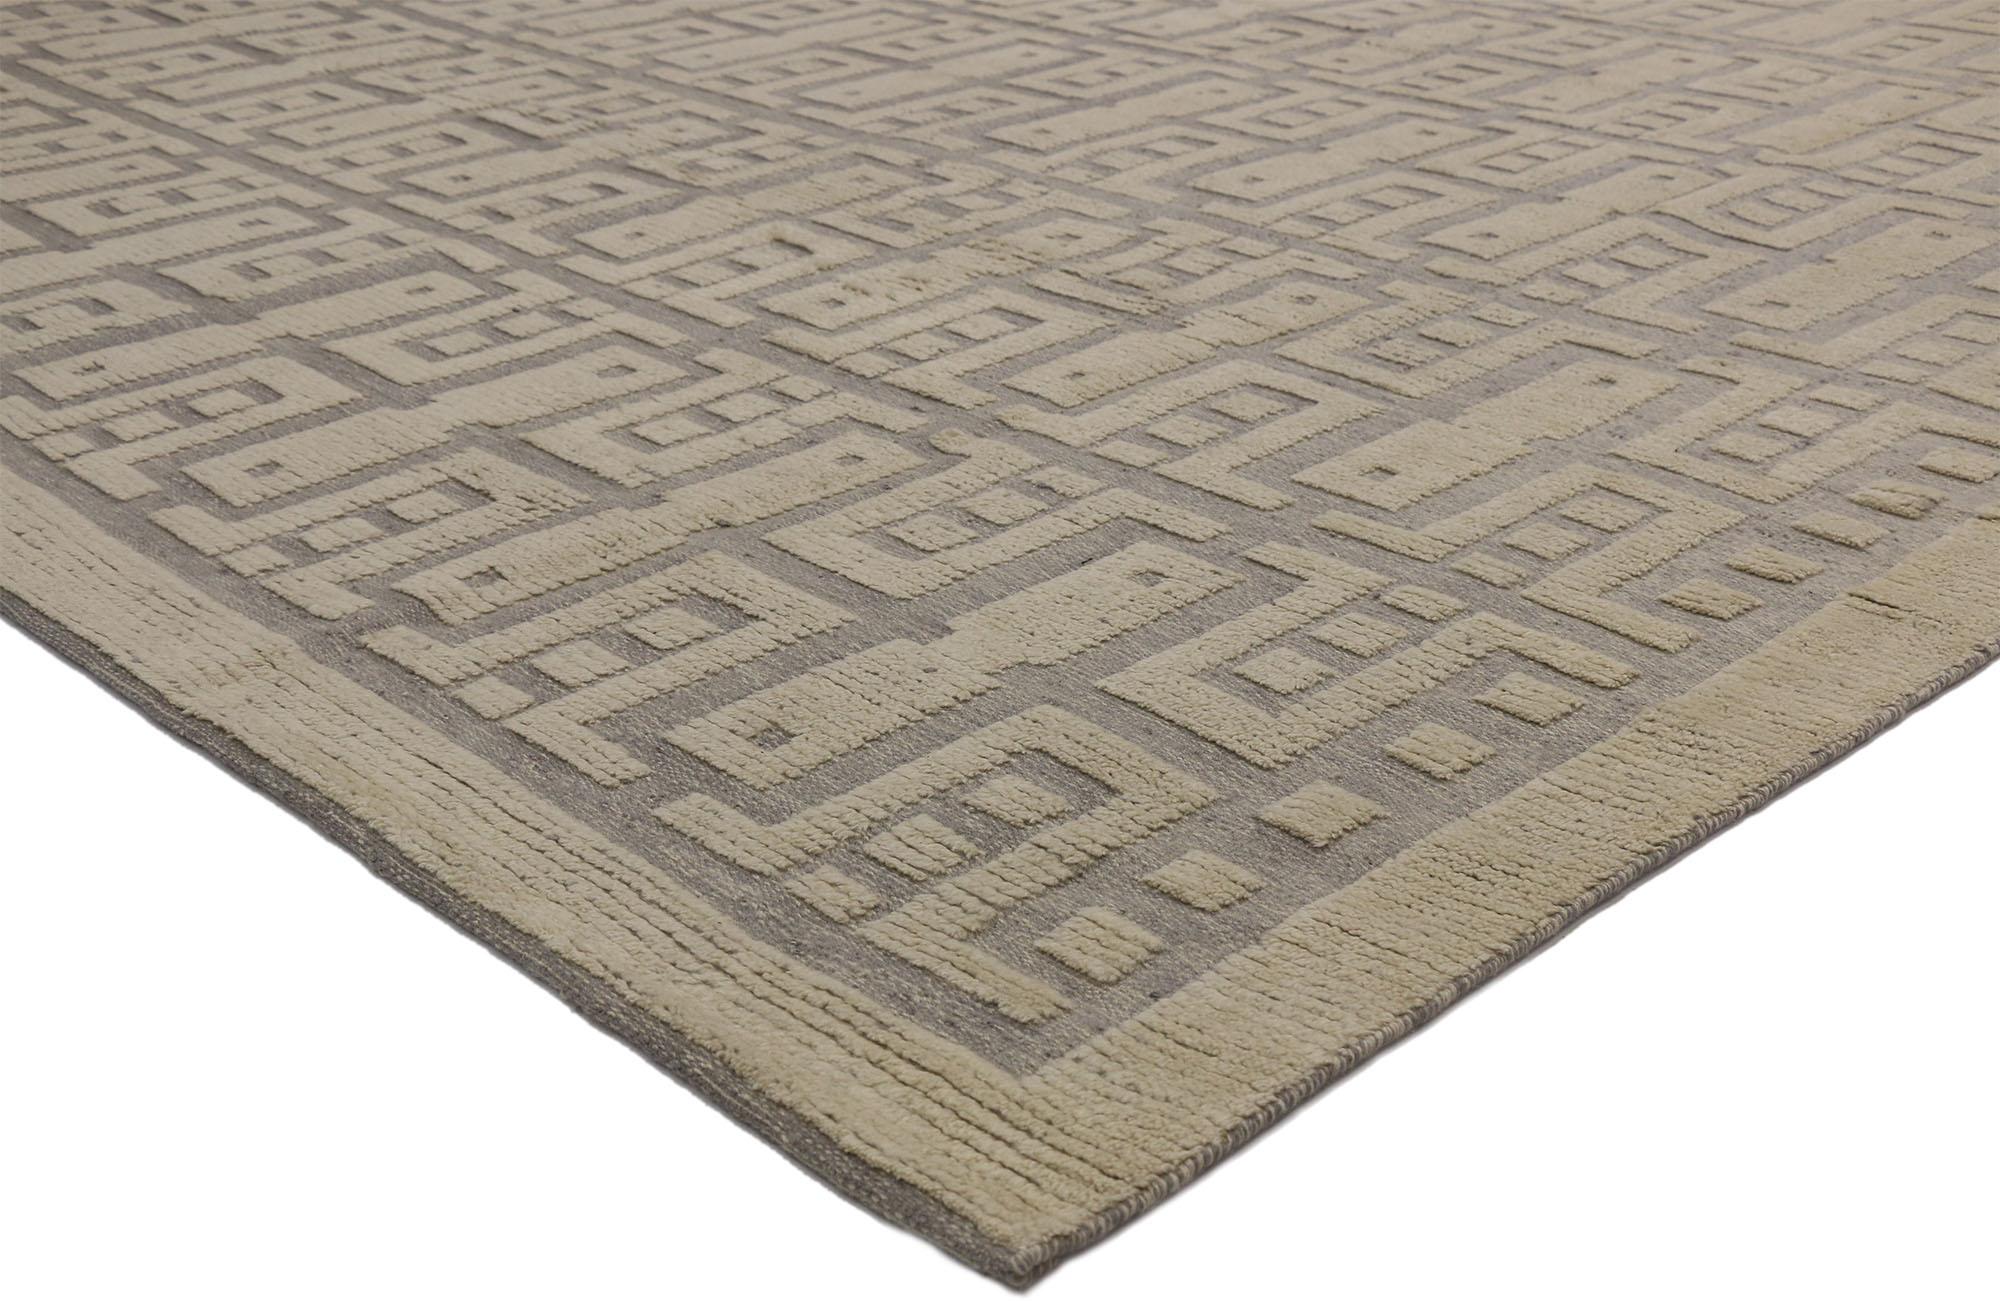 30513 new contemporary high-low Geometric Area rug. Eclectic and sophisticated with a playful texture, this hand knotted wool contemporary high-low geometric area rug showcases modern style with a twist. The raised design appears like a variation of